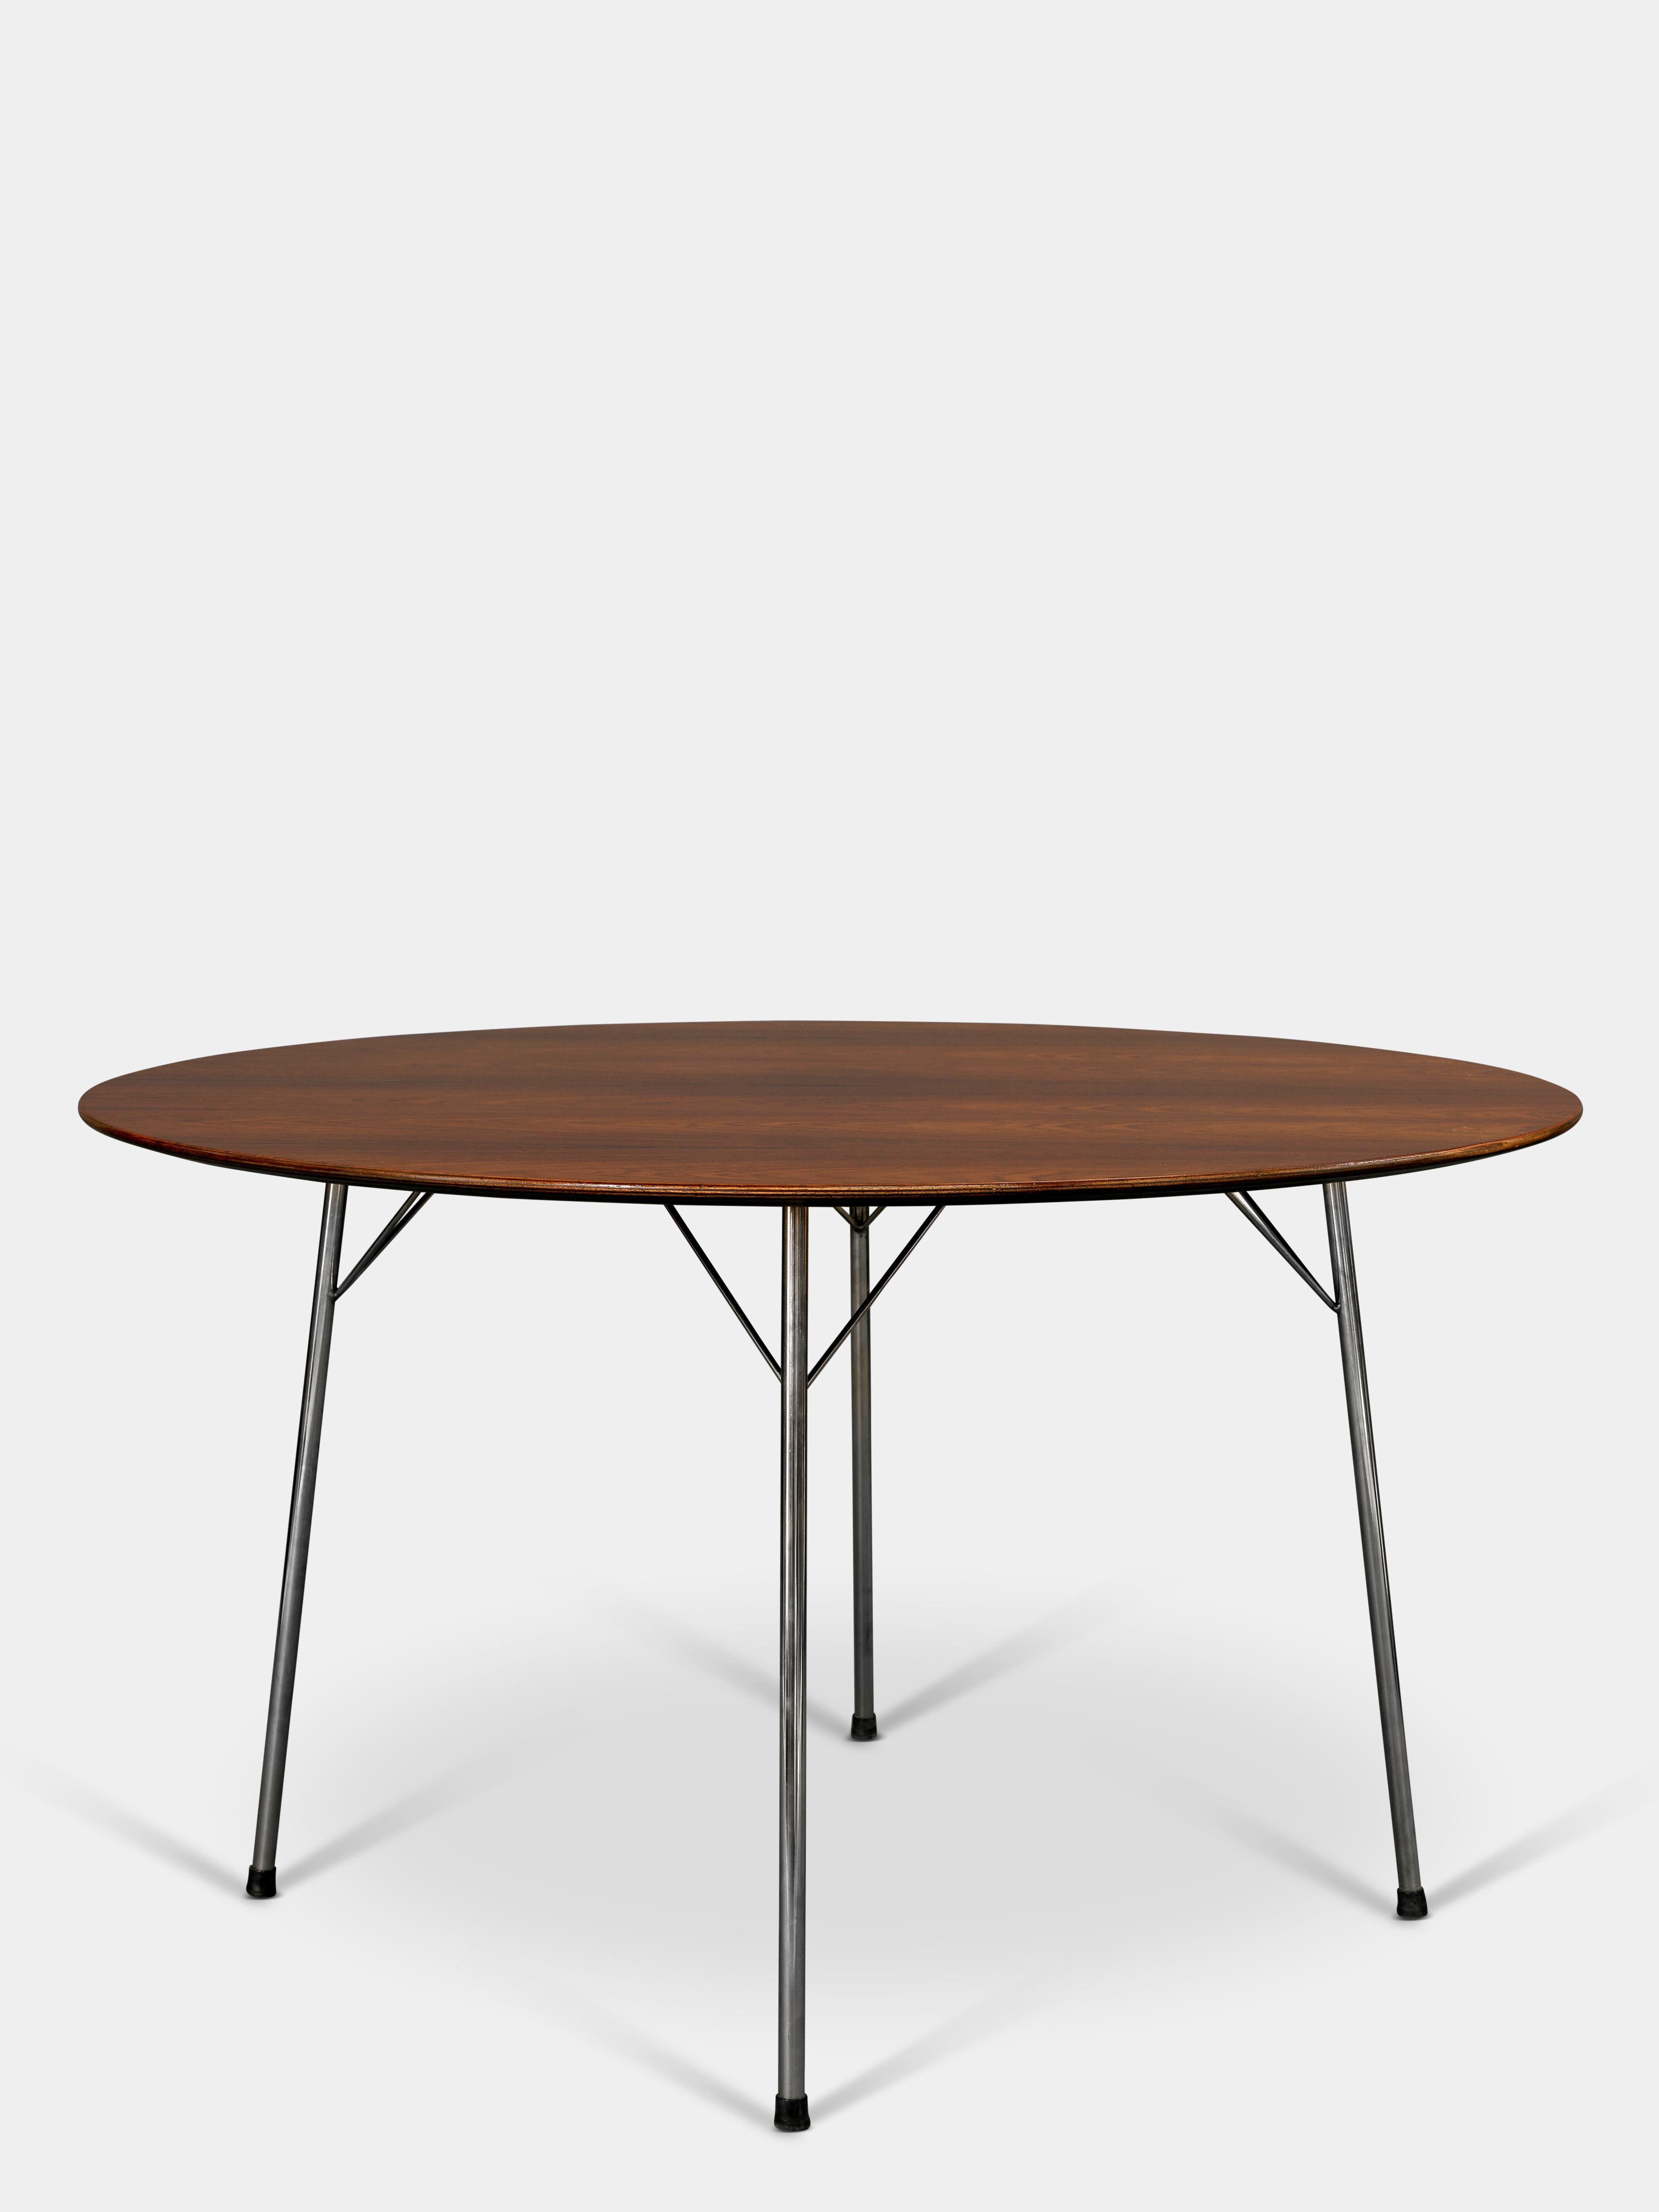 Arne Jacobsen (1902-1971)

A matching set of four series seven chairs and a round dining table with chromed steel base and table top of rosewood.

Designed by Arne Jacobsen for Fritz Hansen, circa 1960.